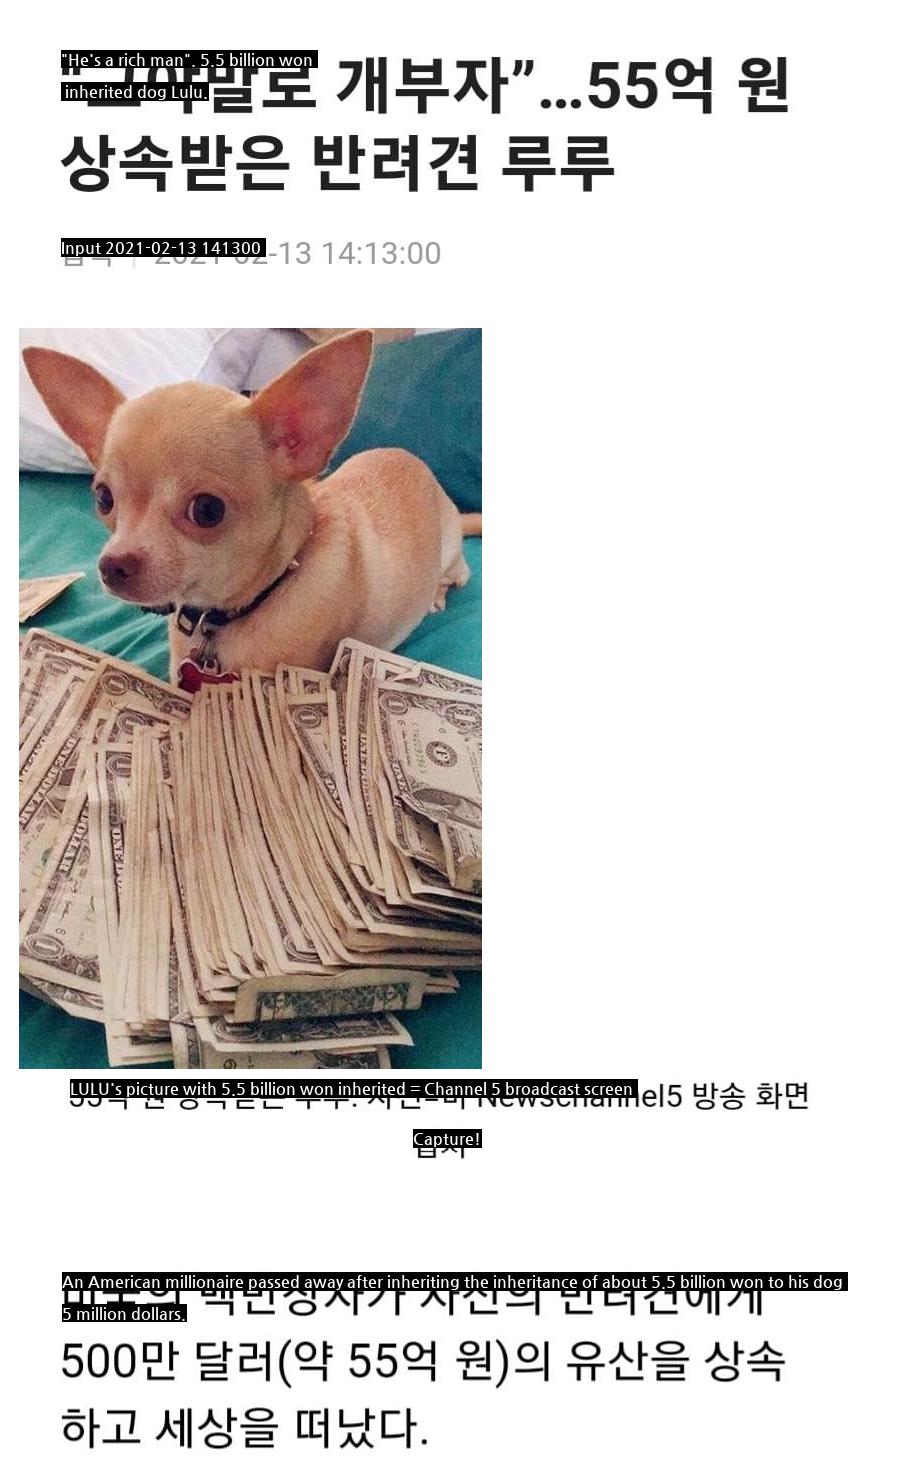 We have 5 billion won for Chihuahua.